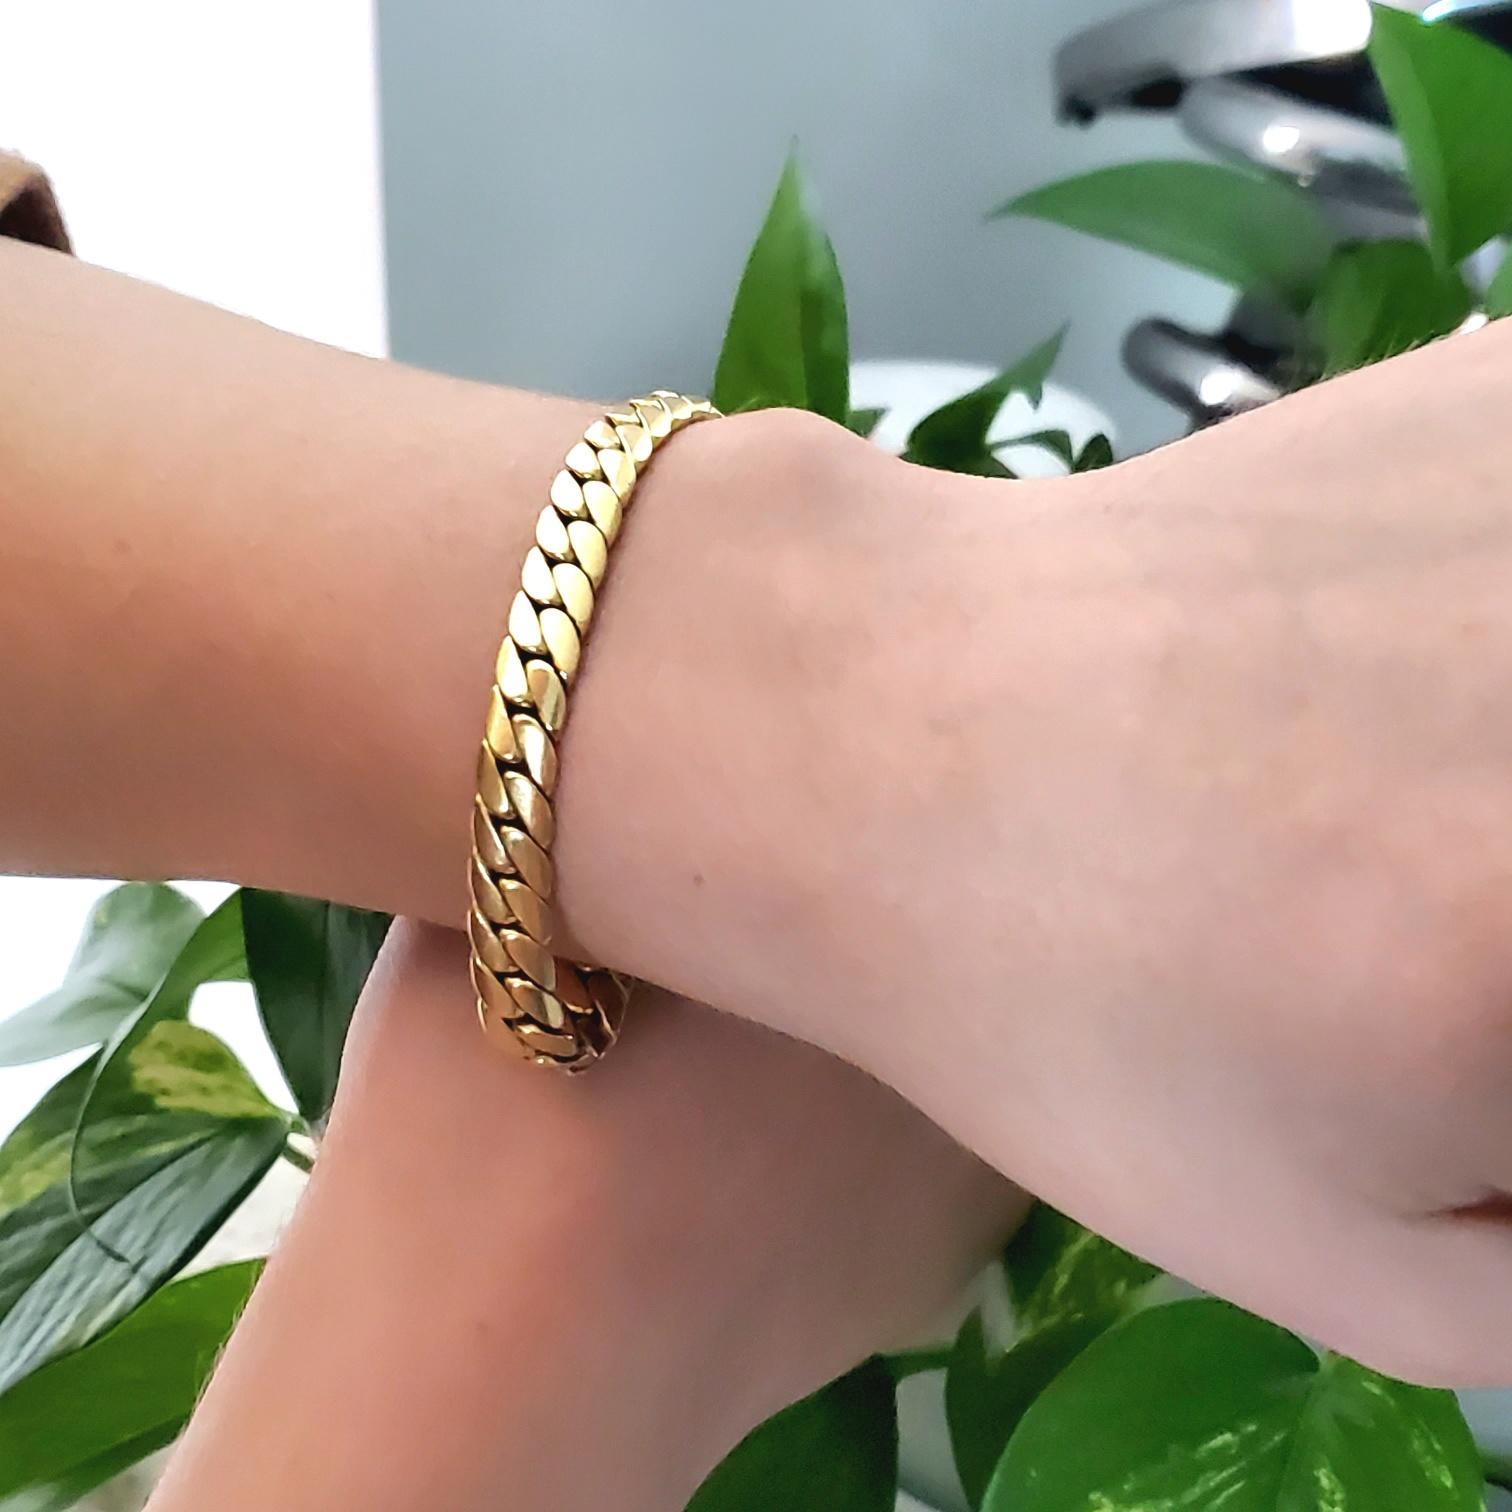 A bracelet designed by Cartier.

Beautiful, sleek and elegant bracelet, created in Paris France by the jewelry house of Cartier, back in the 1970's. This piece is very high in fashion and has been crafted with flat curb links in solid yellow gold of